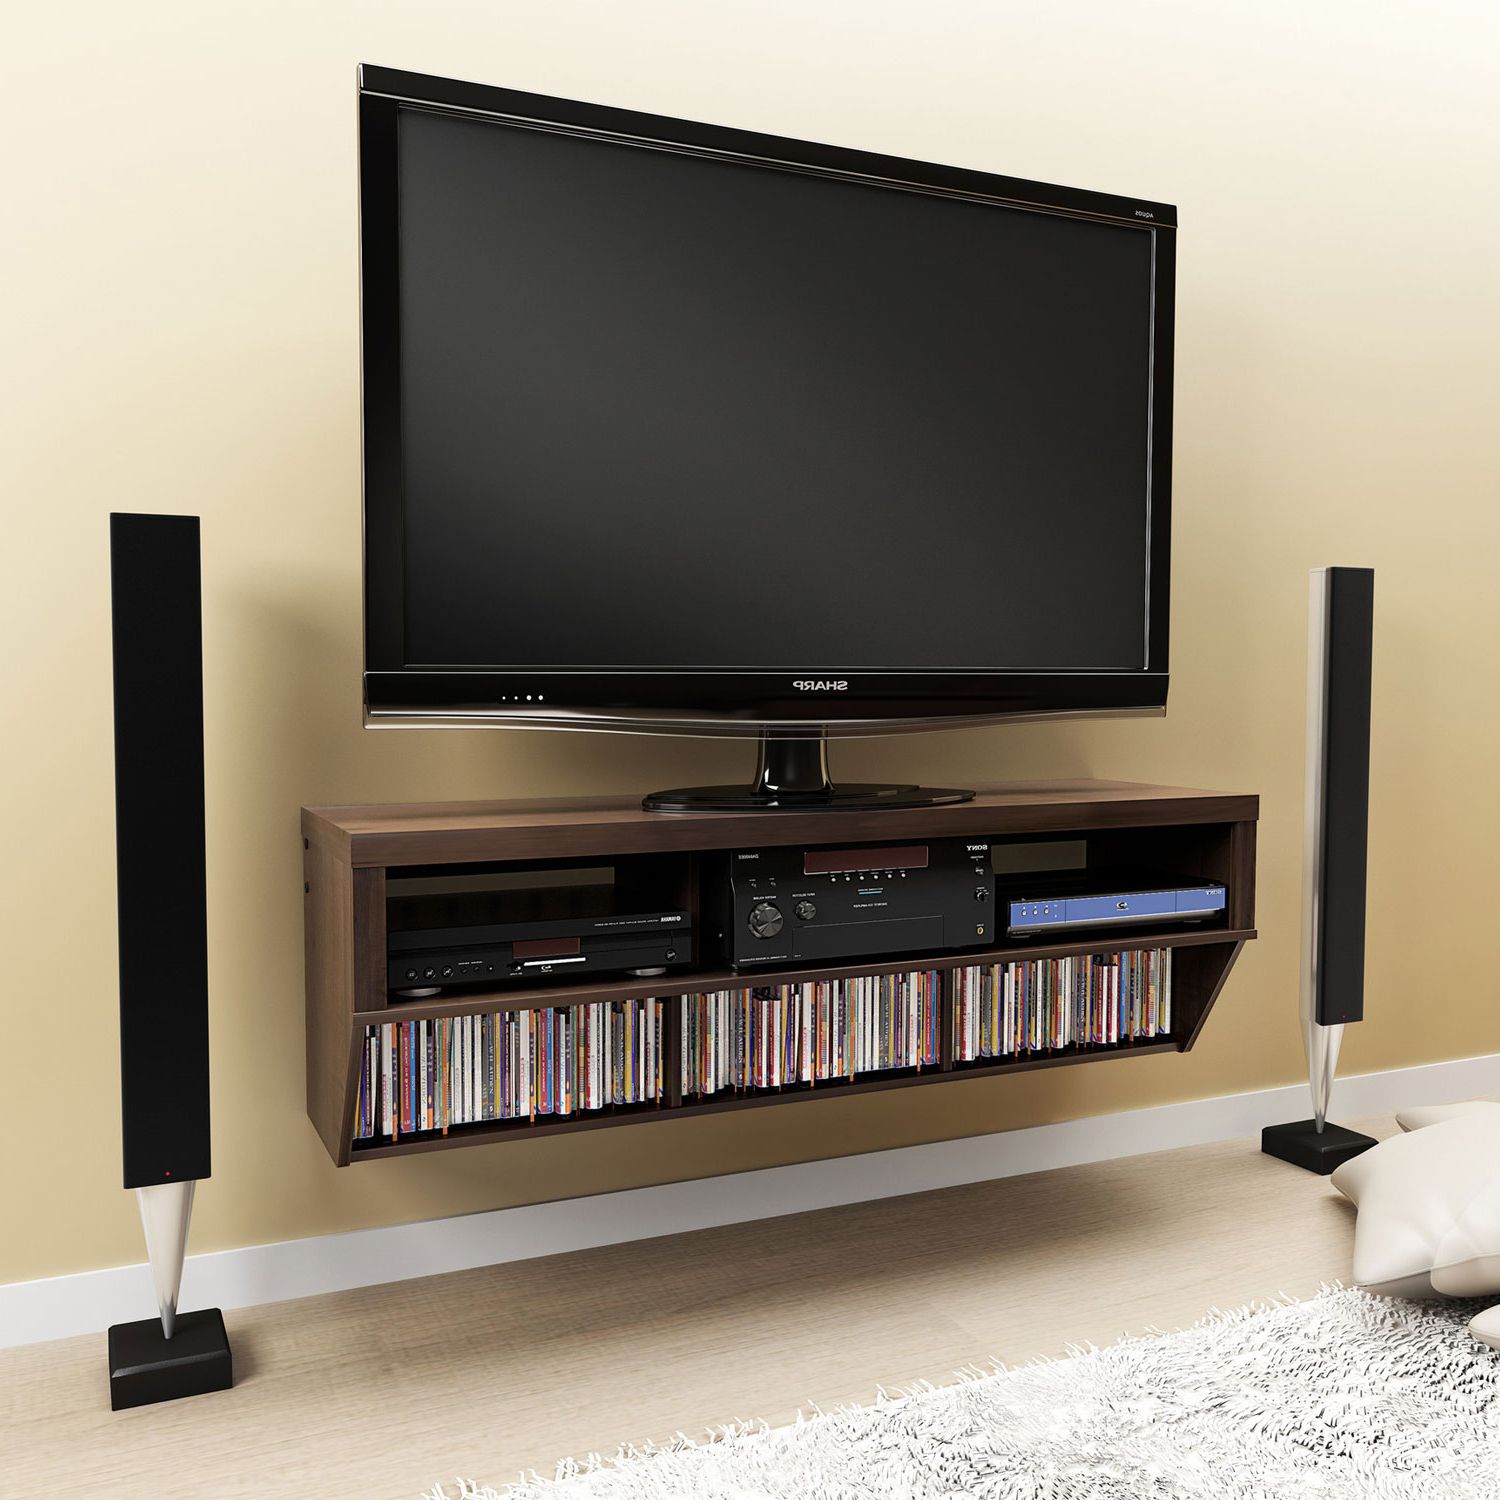 Top Shelf Mount Tv Stands Pertaining To Recent Cool Flat Screen Tv Stands With Mount (View 13 of 15)